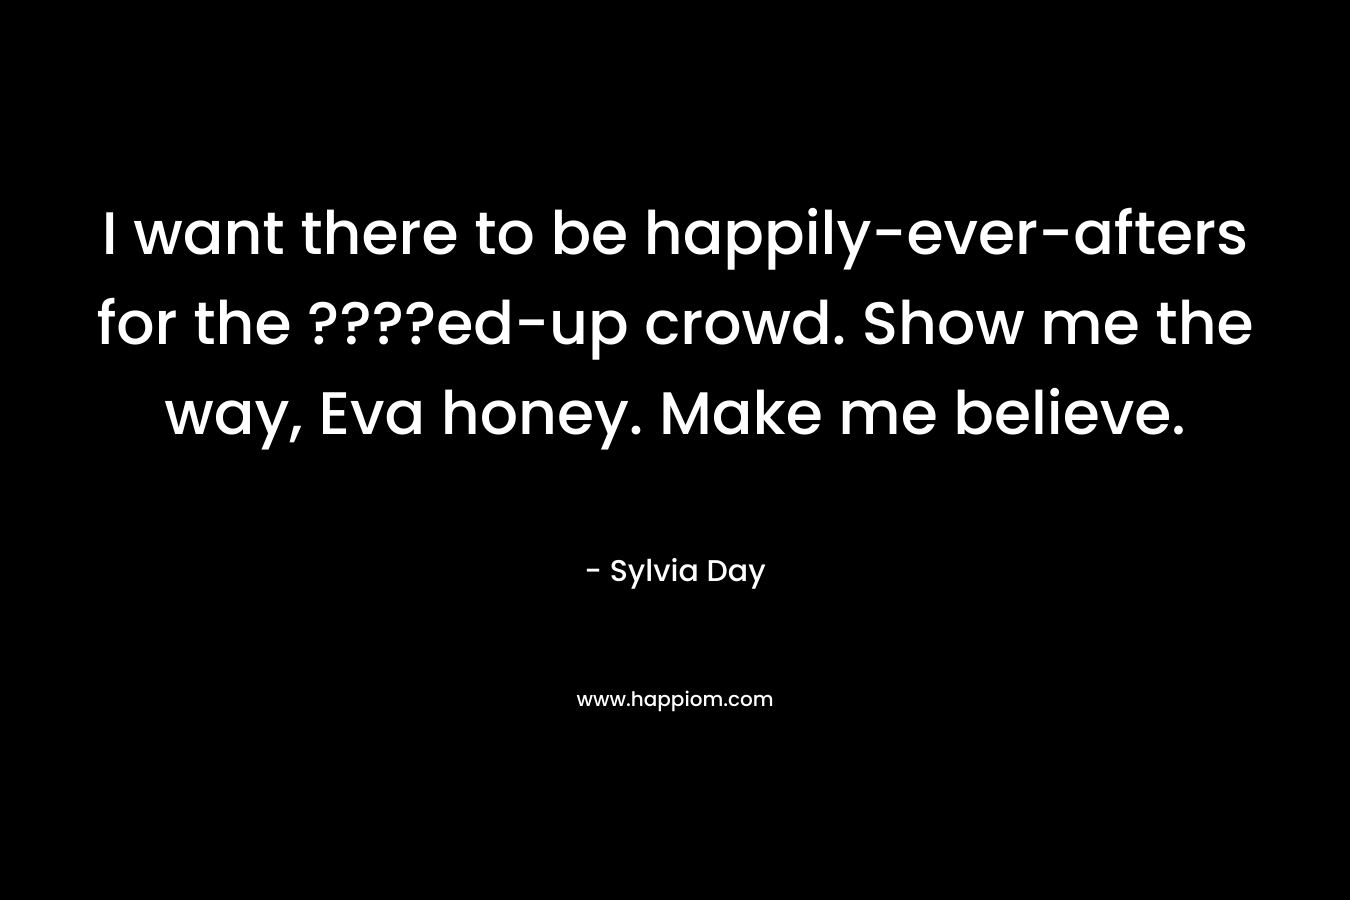 I want there to be happily-ever-afters for the ????ed-up crowd. Show me the way, Eva honey. Make me believe.